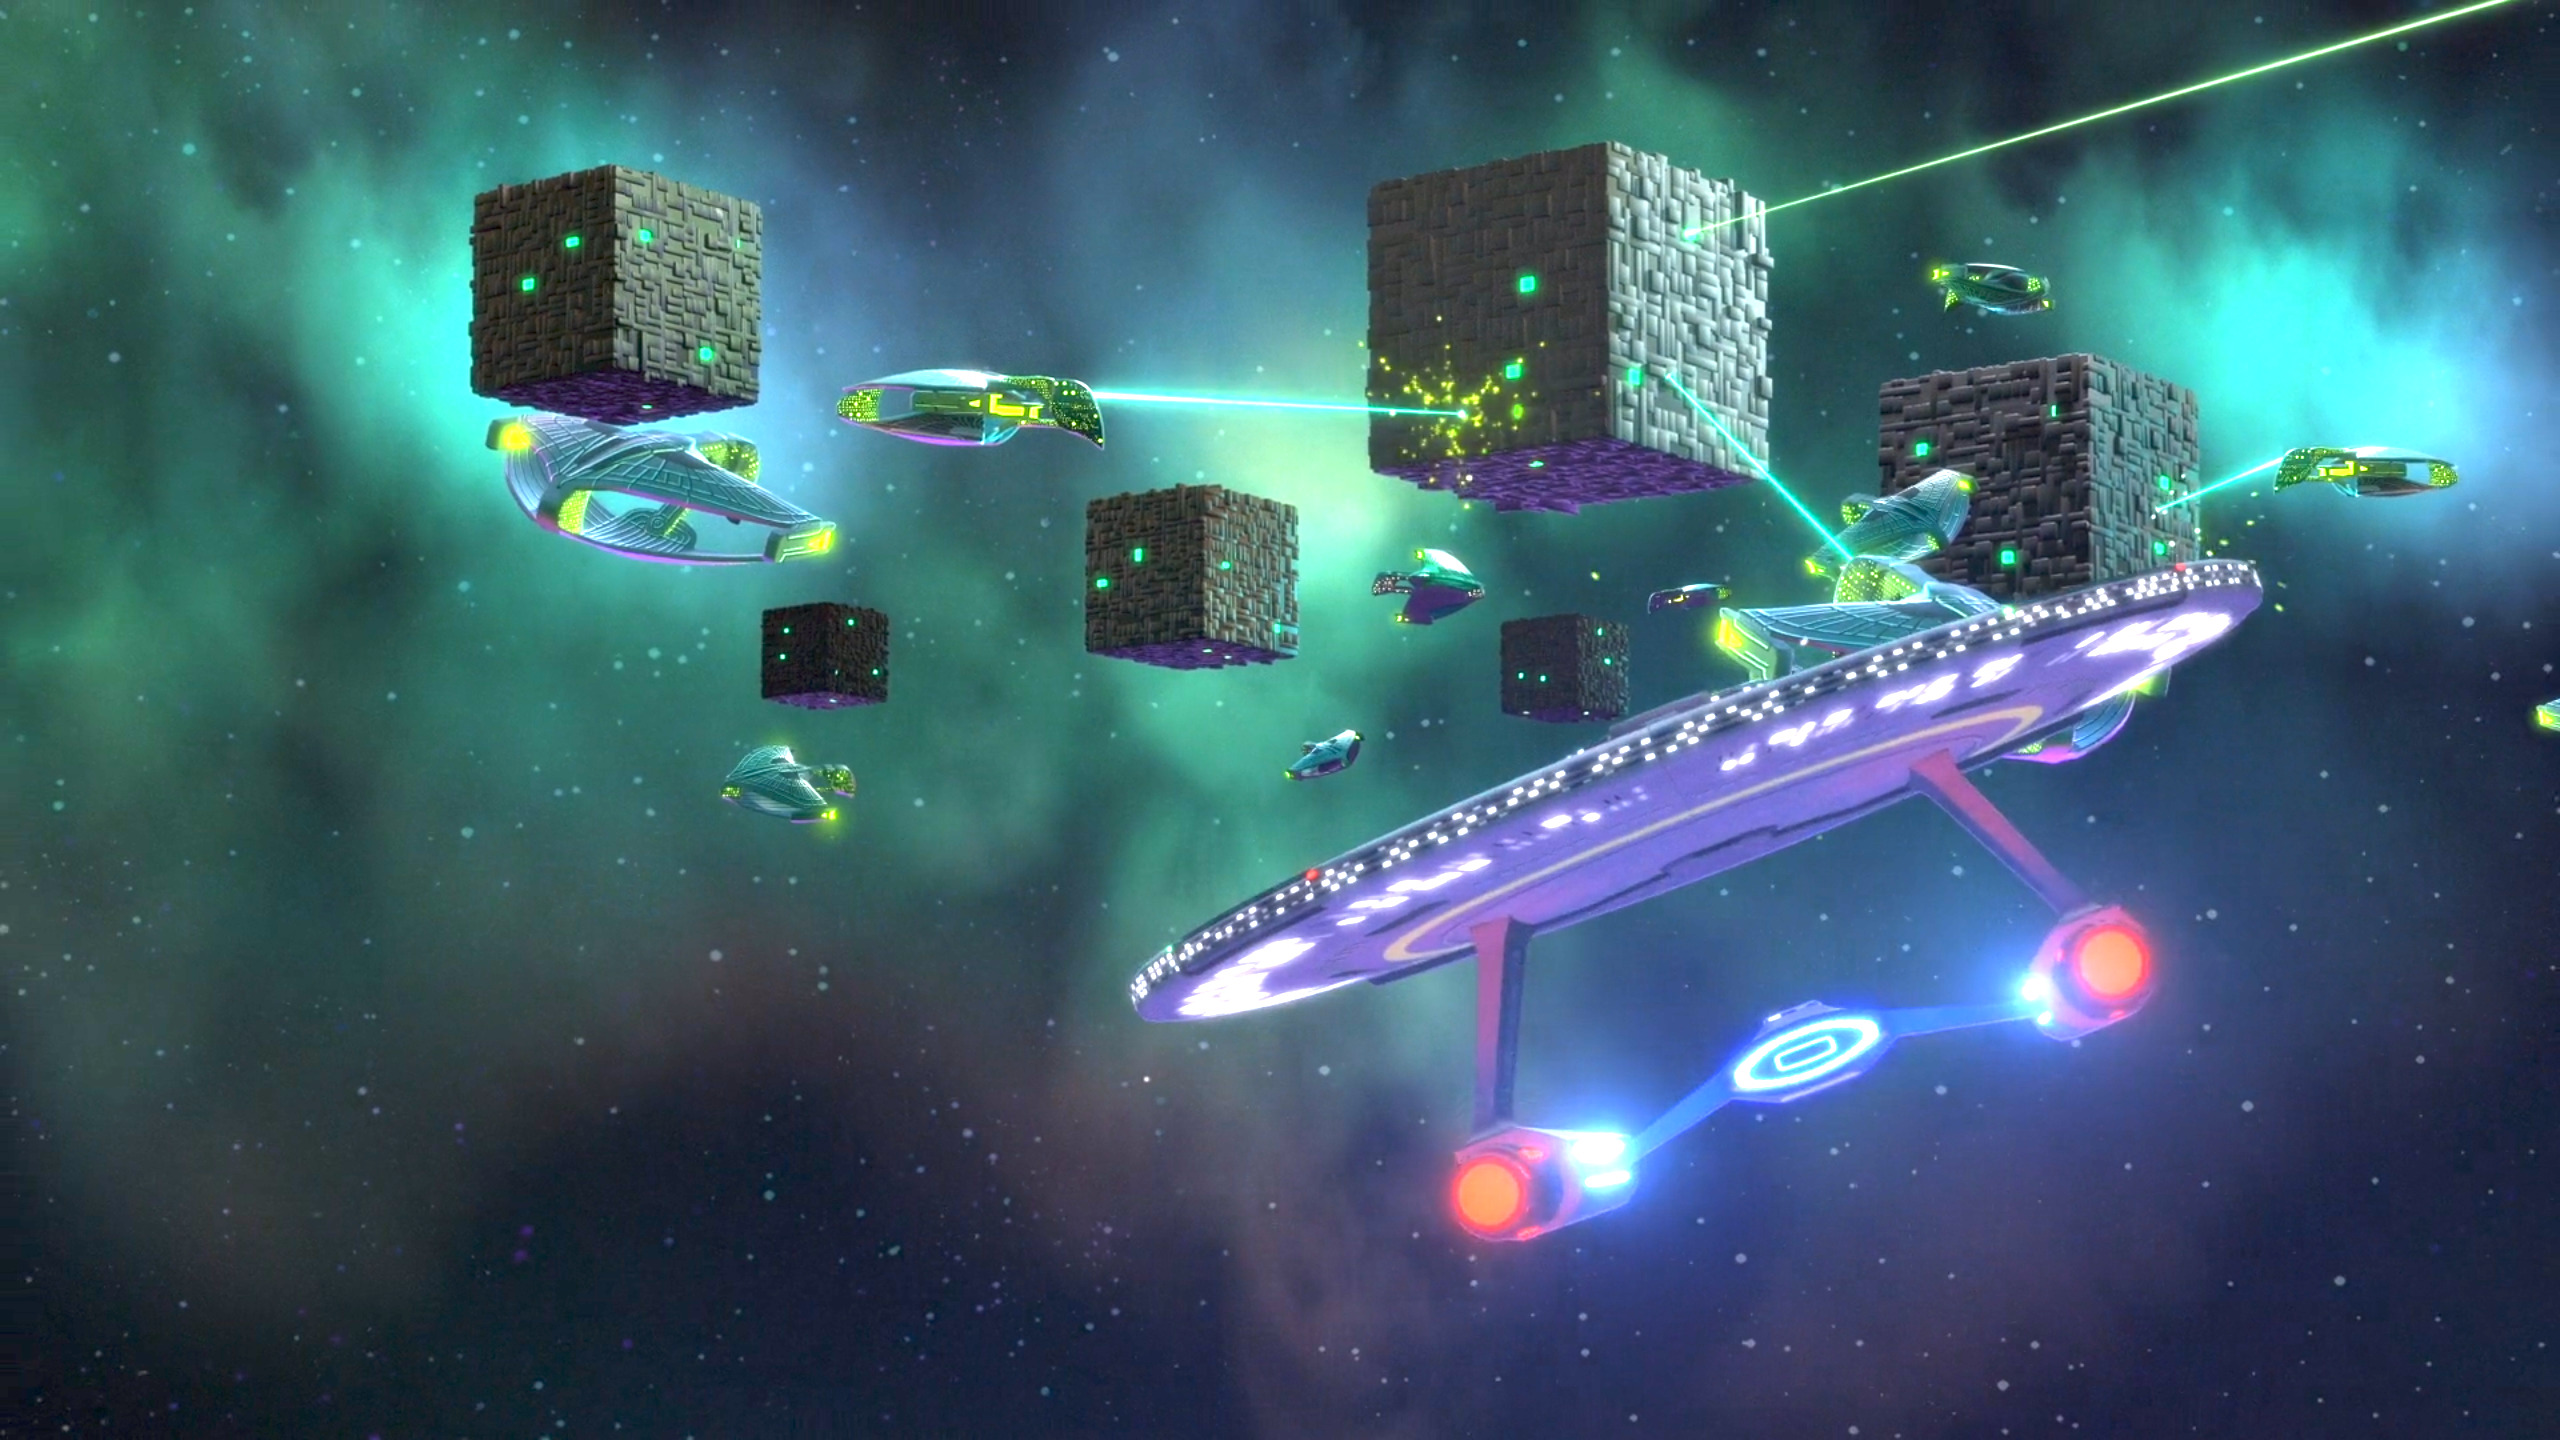 Star Trek: Lower Decks Debuts with Mixed Reviews FPS Review